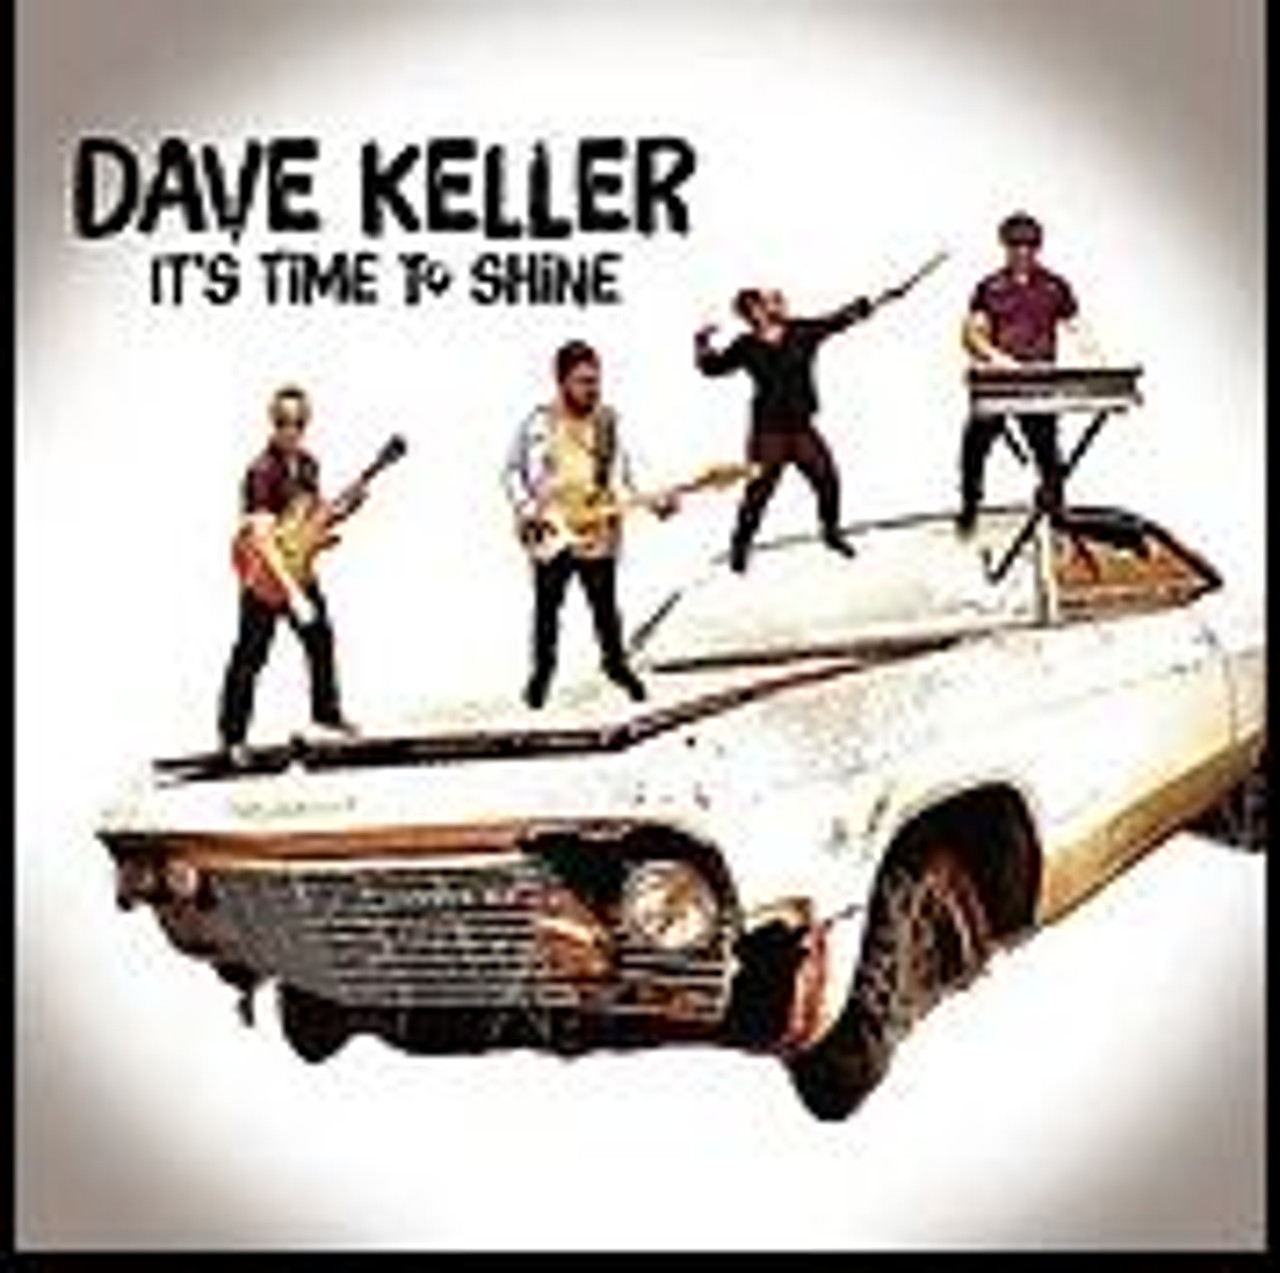 DAVE KELLER - IT'S TIME TO SHINE